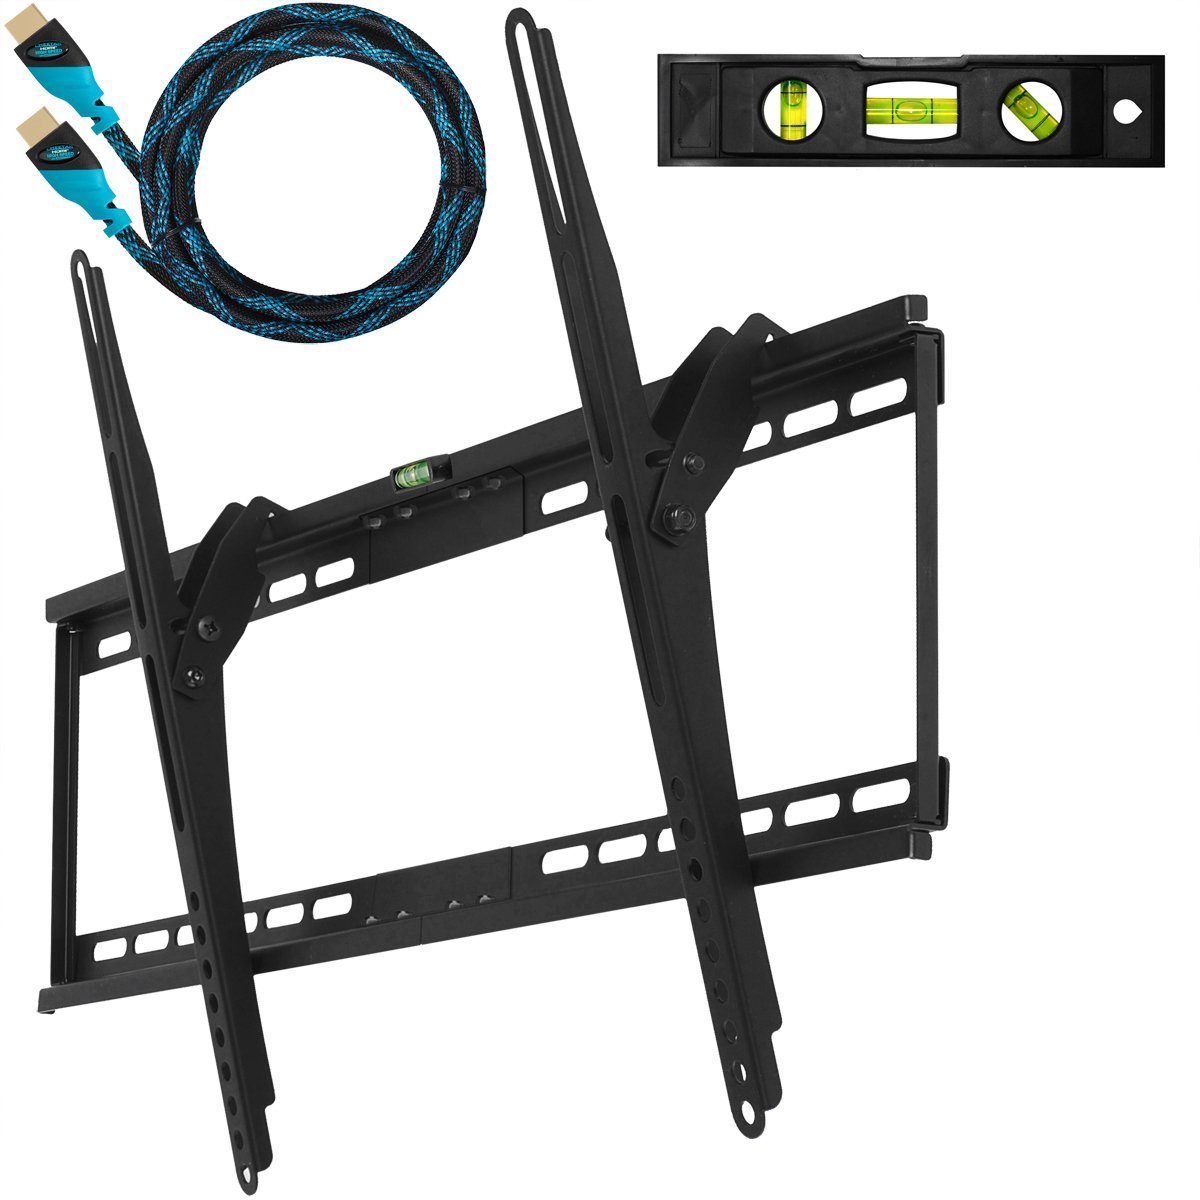 Flat Screen TV Wall Mount Bracket for 32-65 inch Plasma, LED, and LCD ...